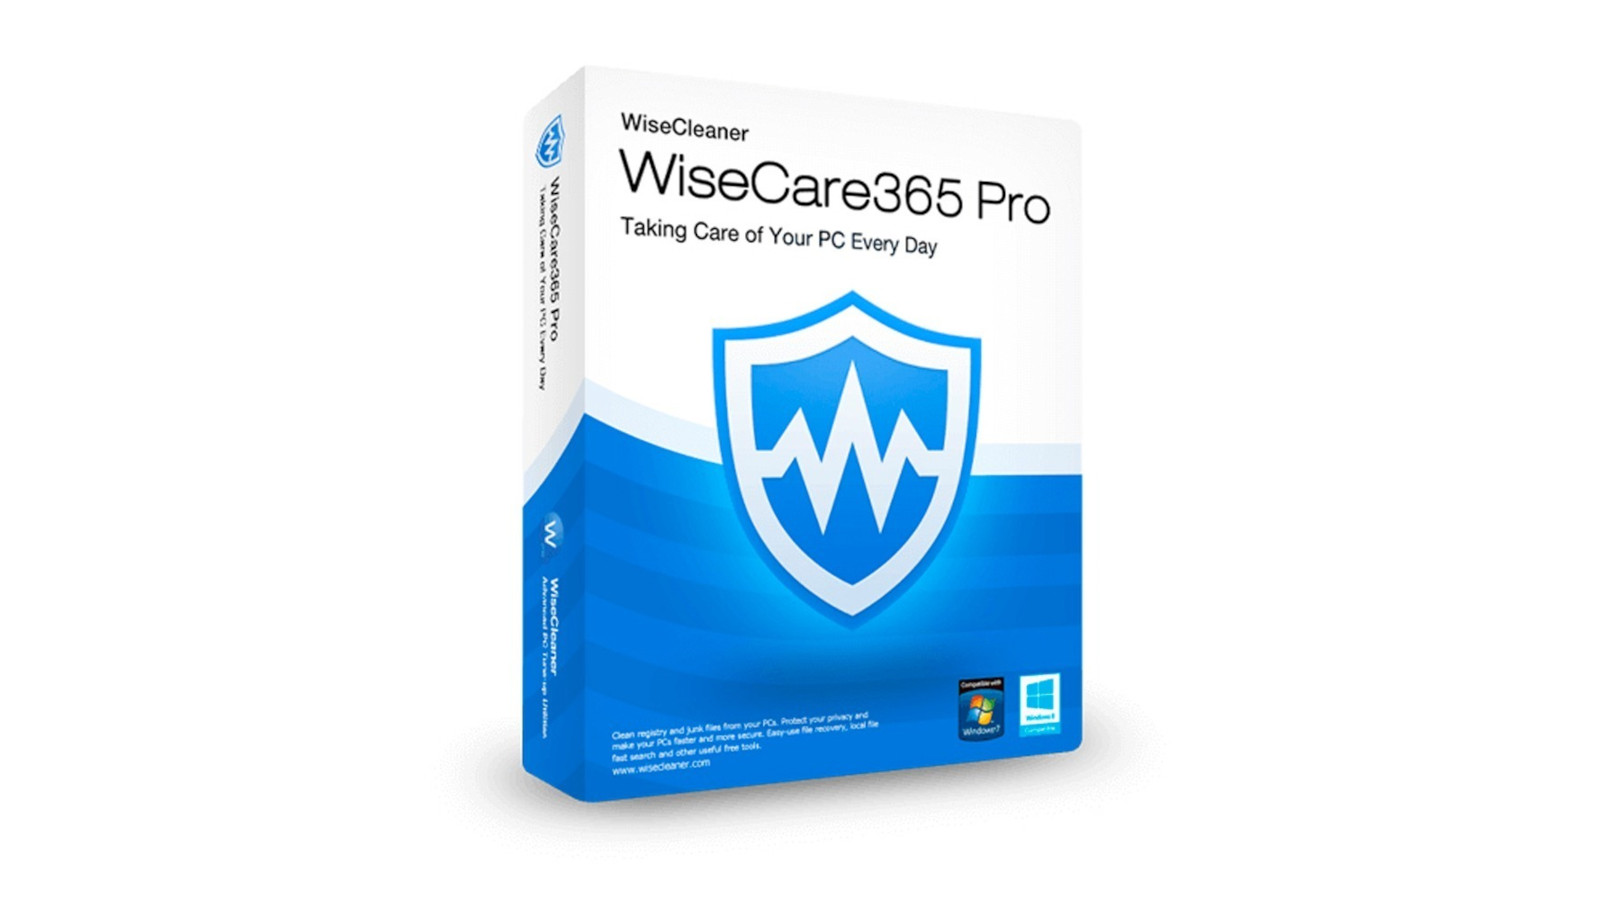 Wise Care 365 PRO CD Key (1 Year / 1 PC), 18.05 usd